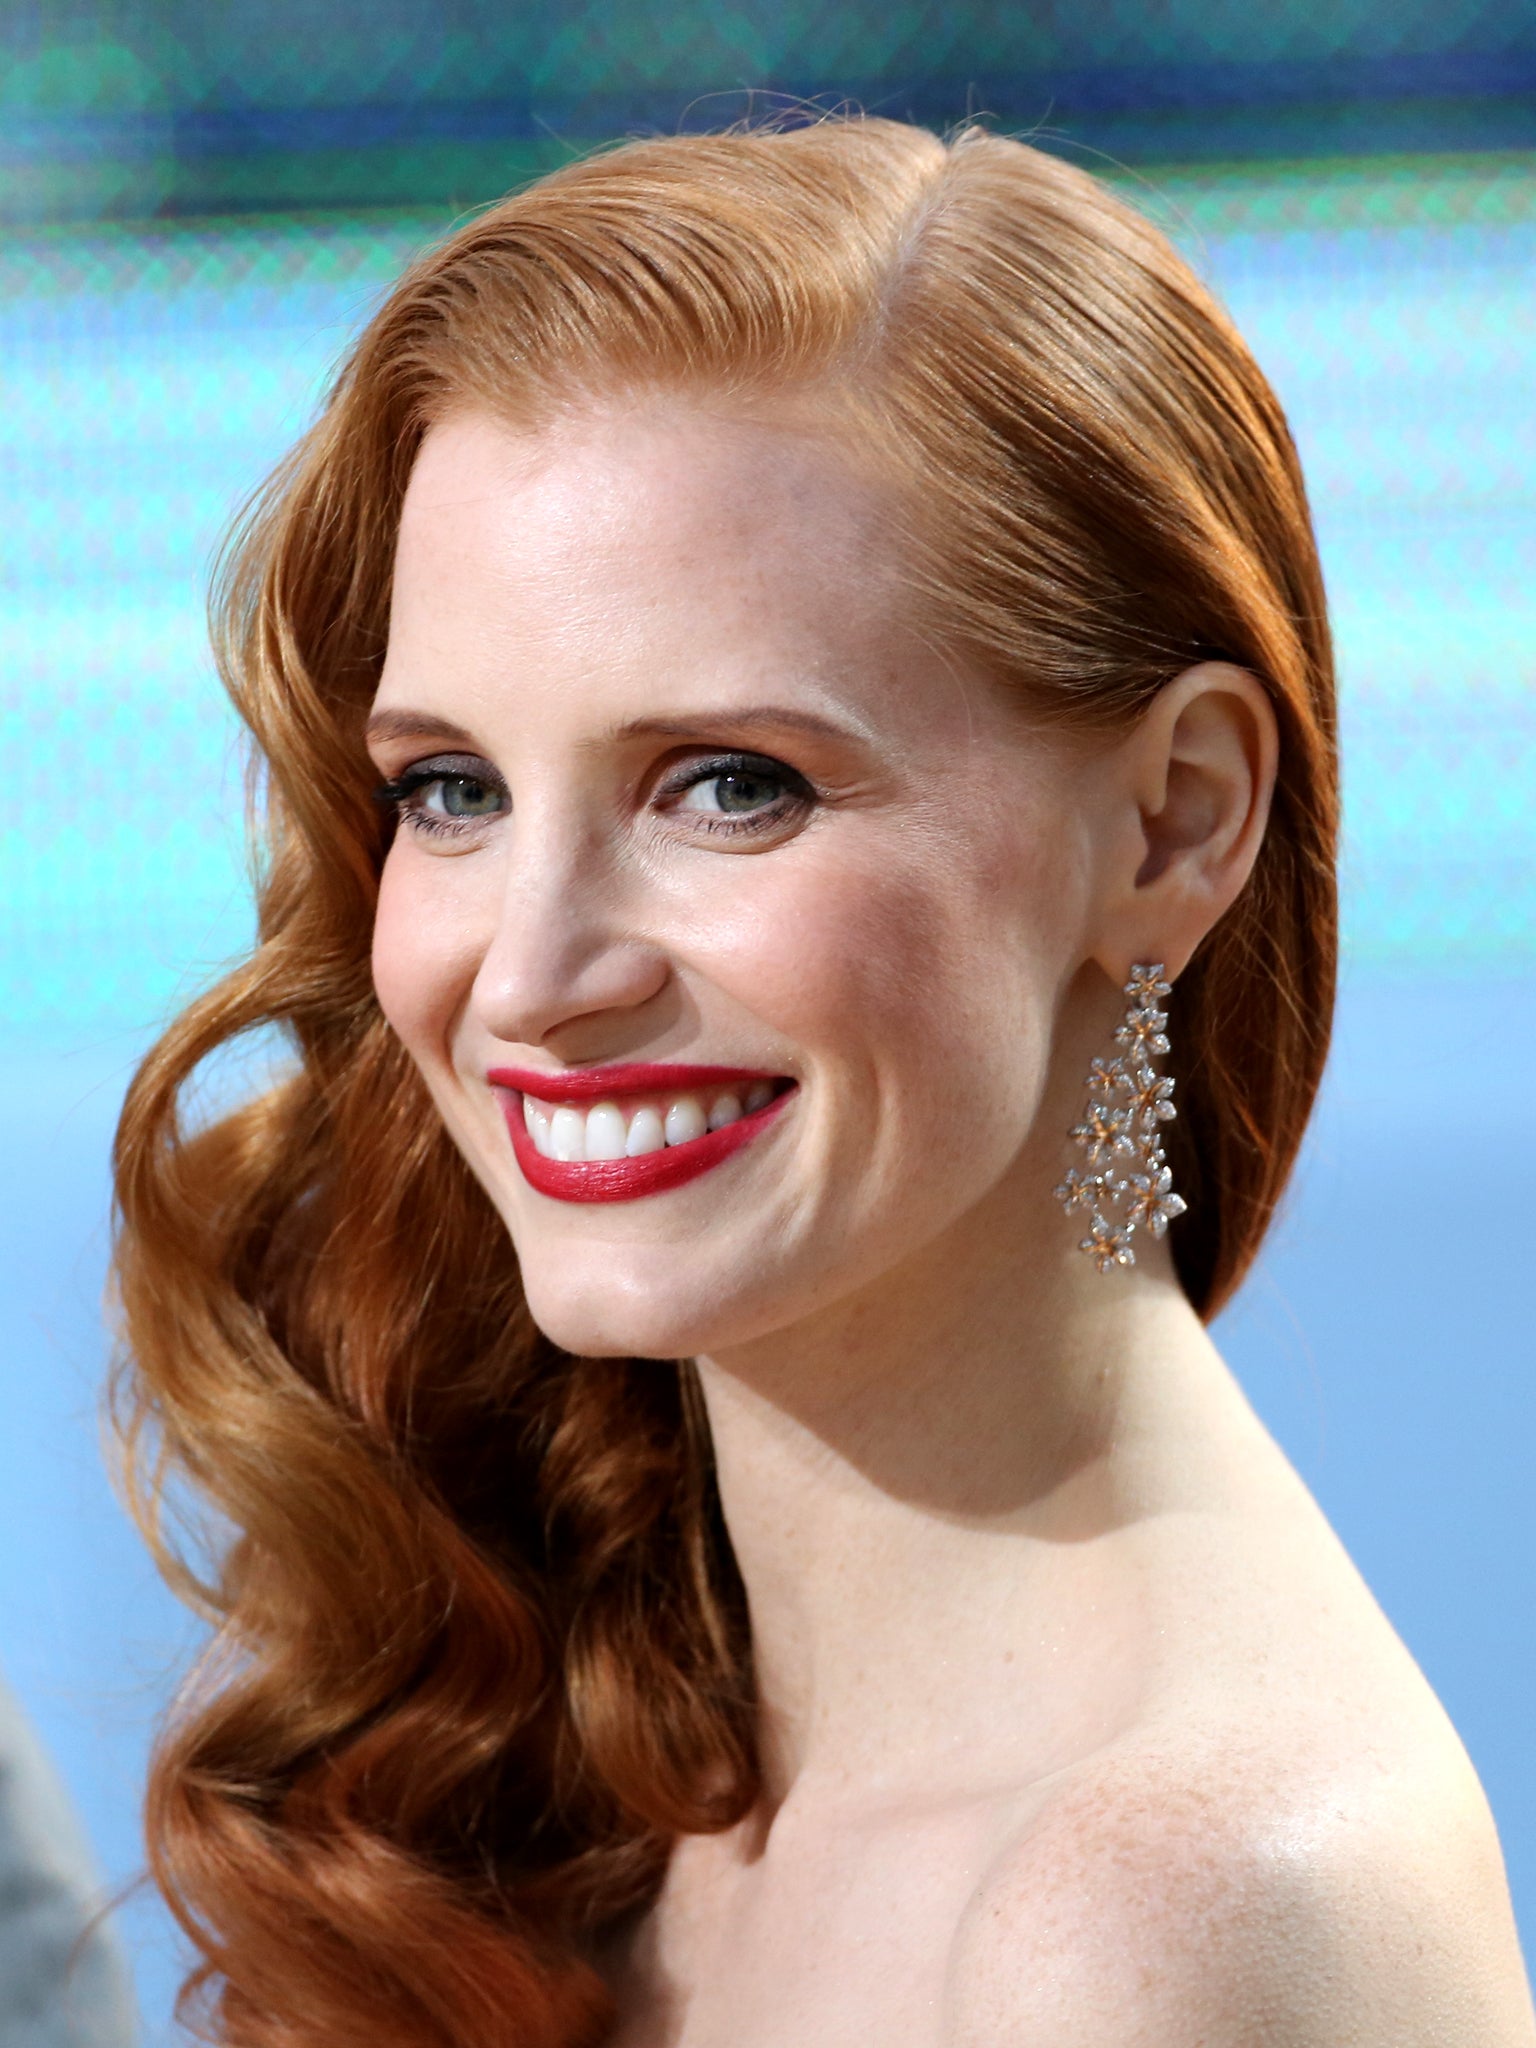 Jessica Chastain: “When I first moved to Los Angeles, I don’t think anyone knew
what to do with me”